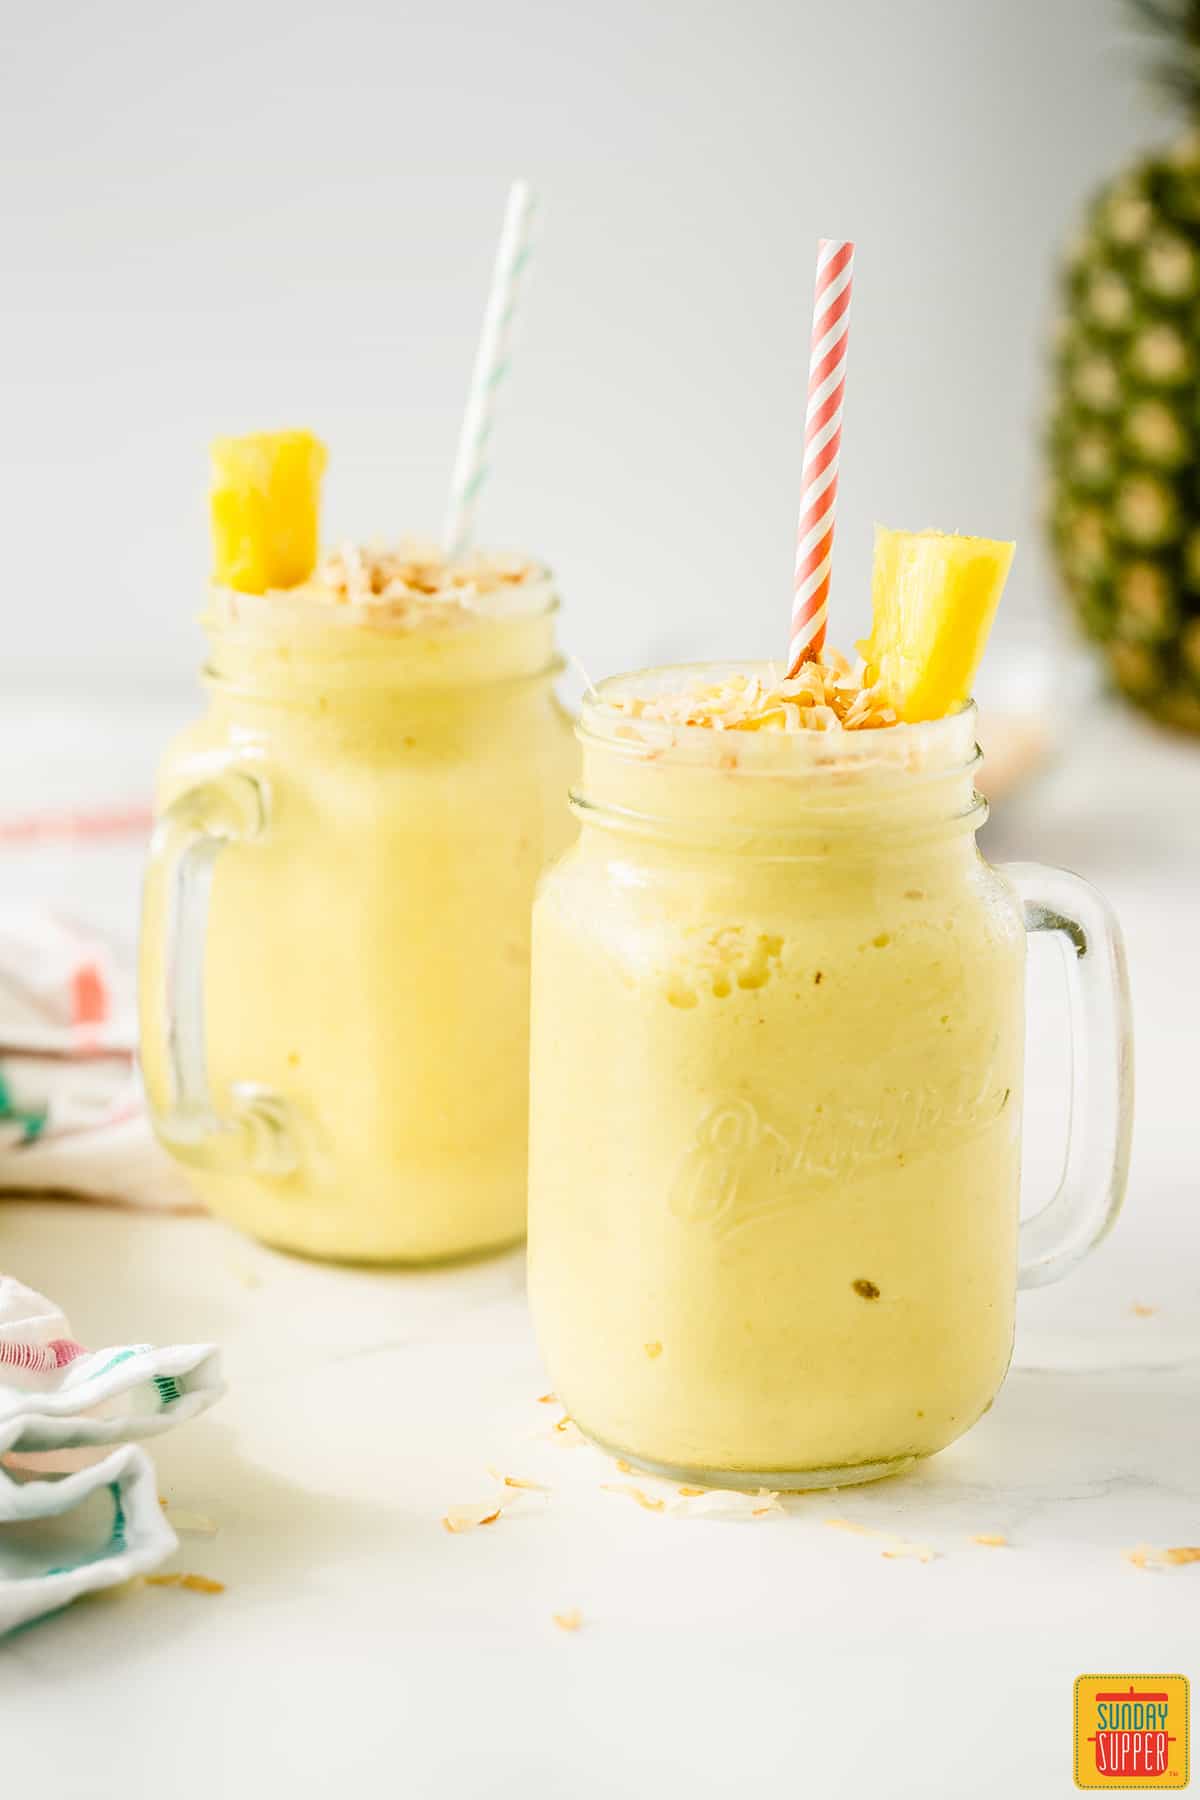 Coconut rum cocktail in two mason jar glasses with straws, pineapple slices, and toasted coconut flakes